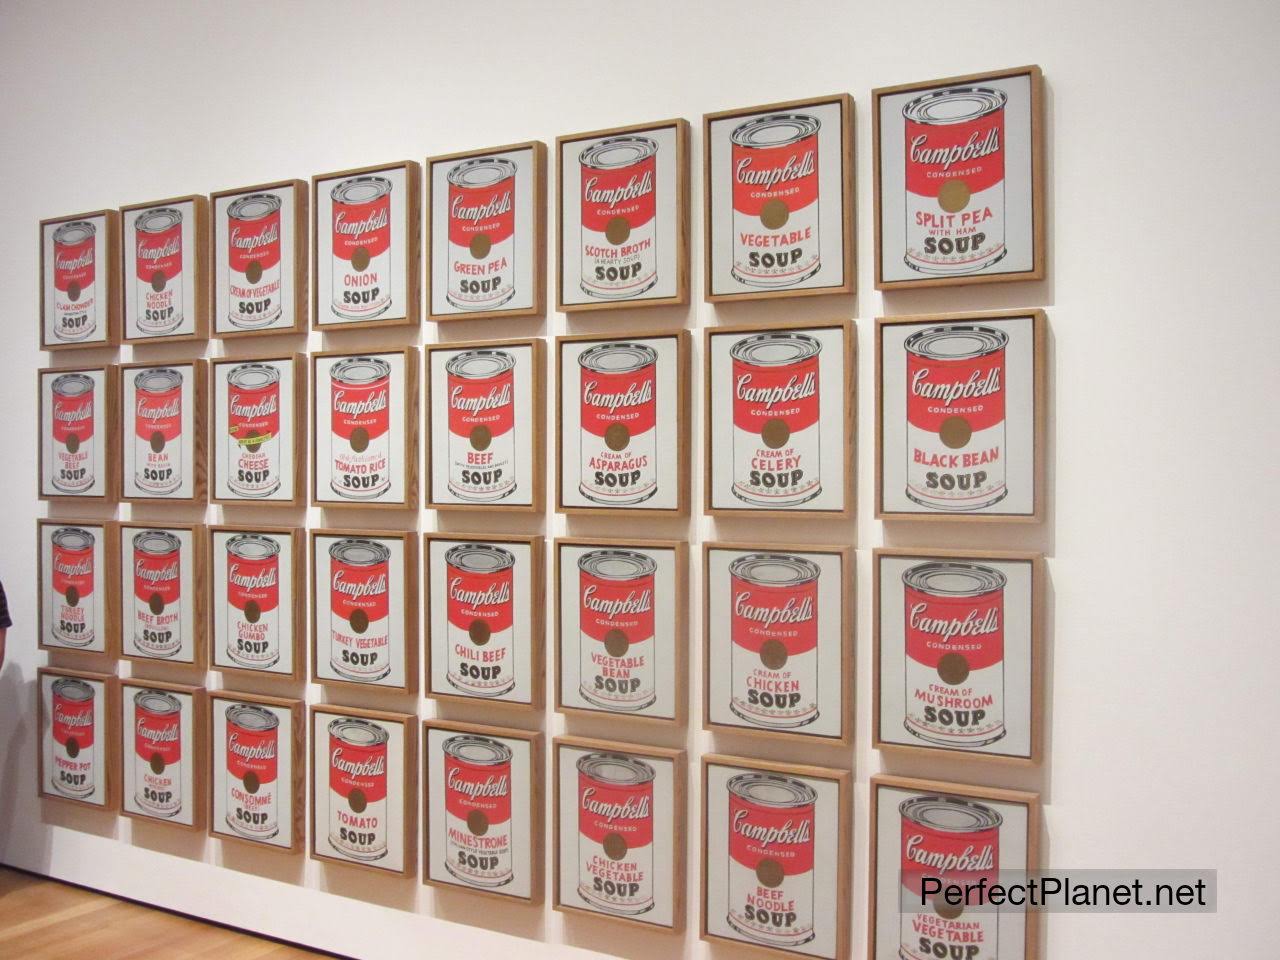 Campbell Soup Cans MoMa